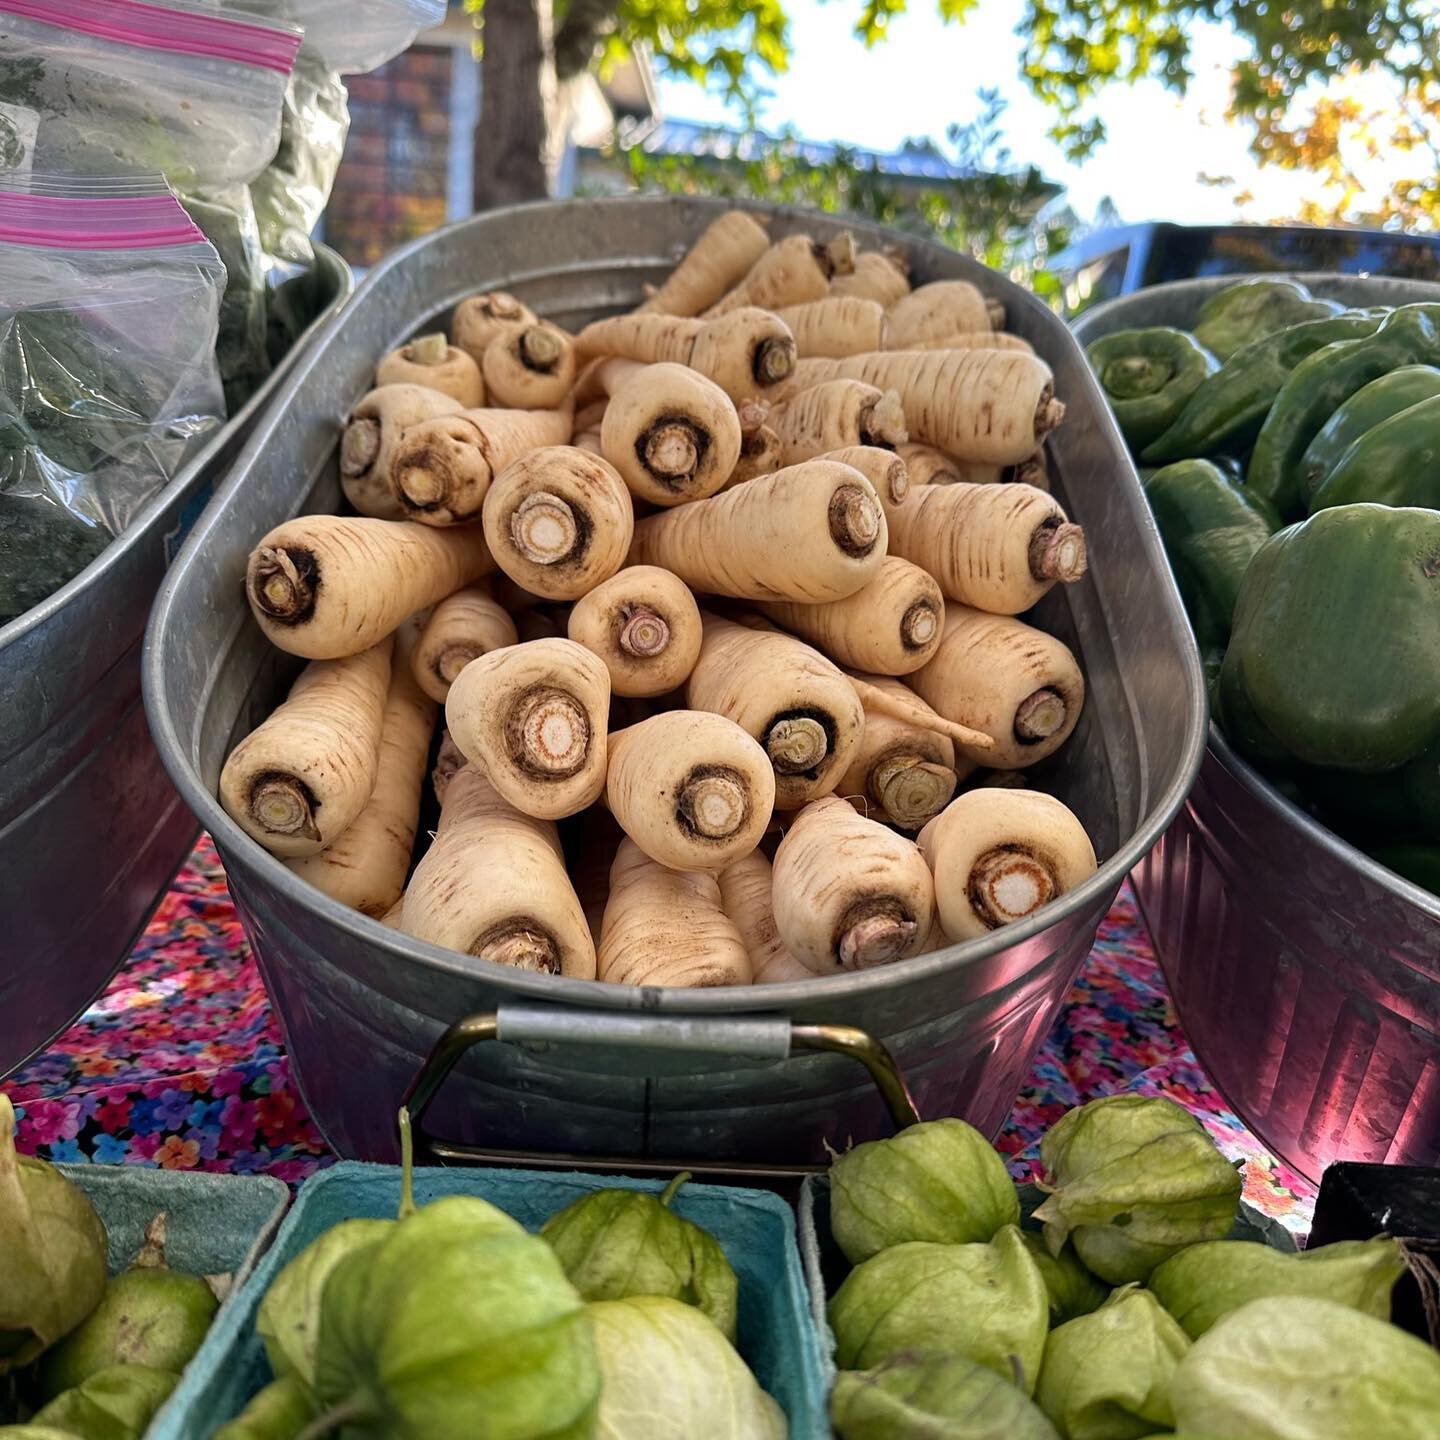 You never know what you&rsquo;ll find at the market, and that&rsquo;s half the fun!! 

Just SEVEN Saturdays left with us - come make the most of these remaining weeks. Still lots of amazing produce like beets, butternut squash, mushrooms, and apples.